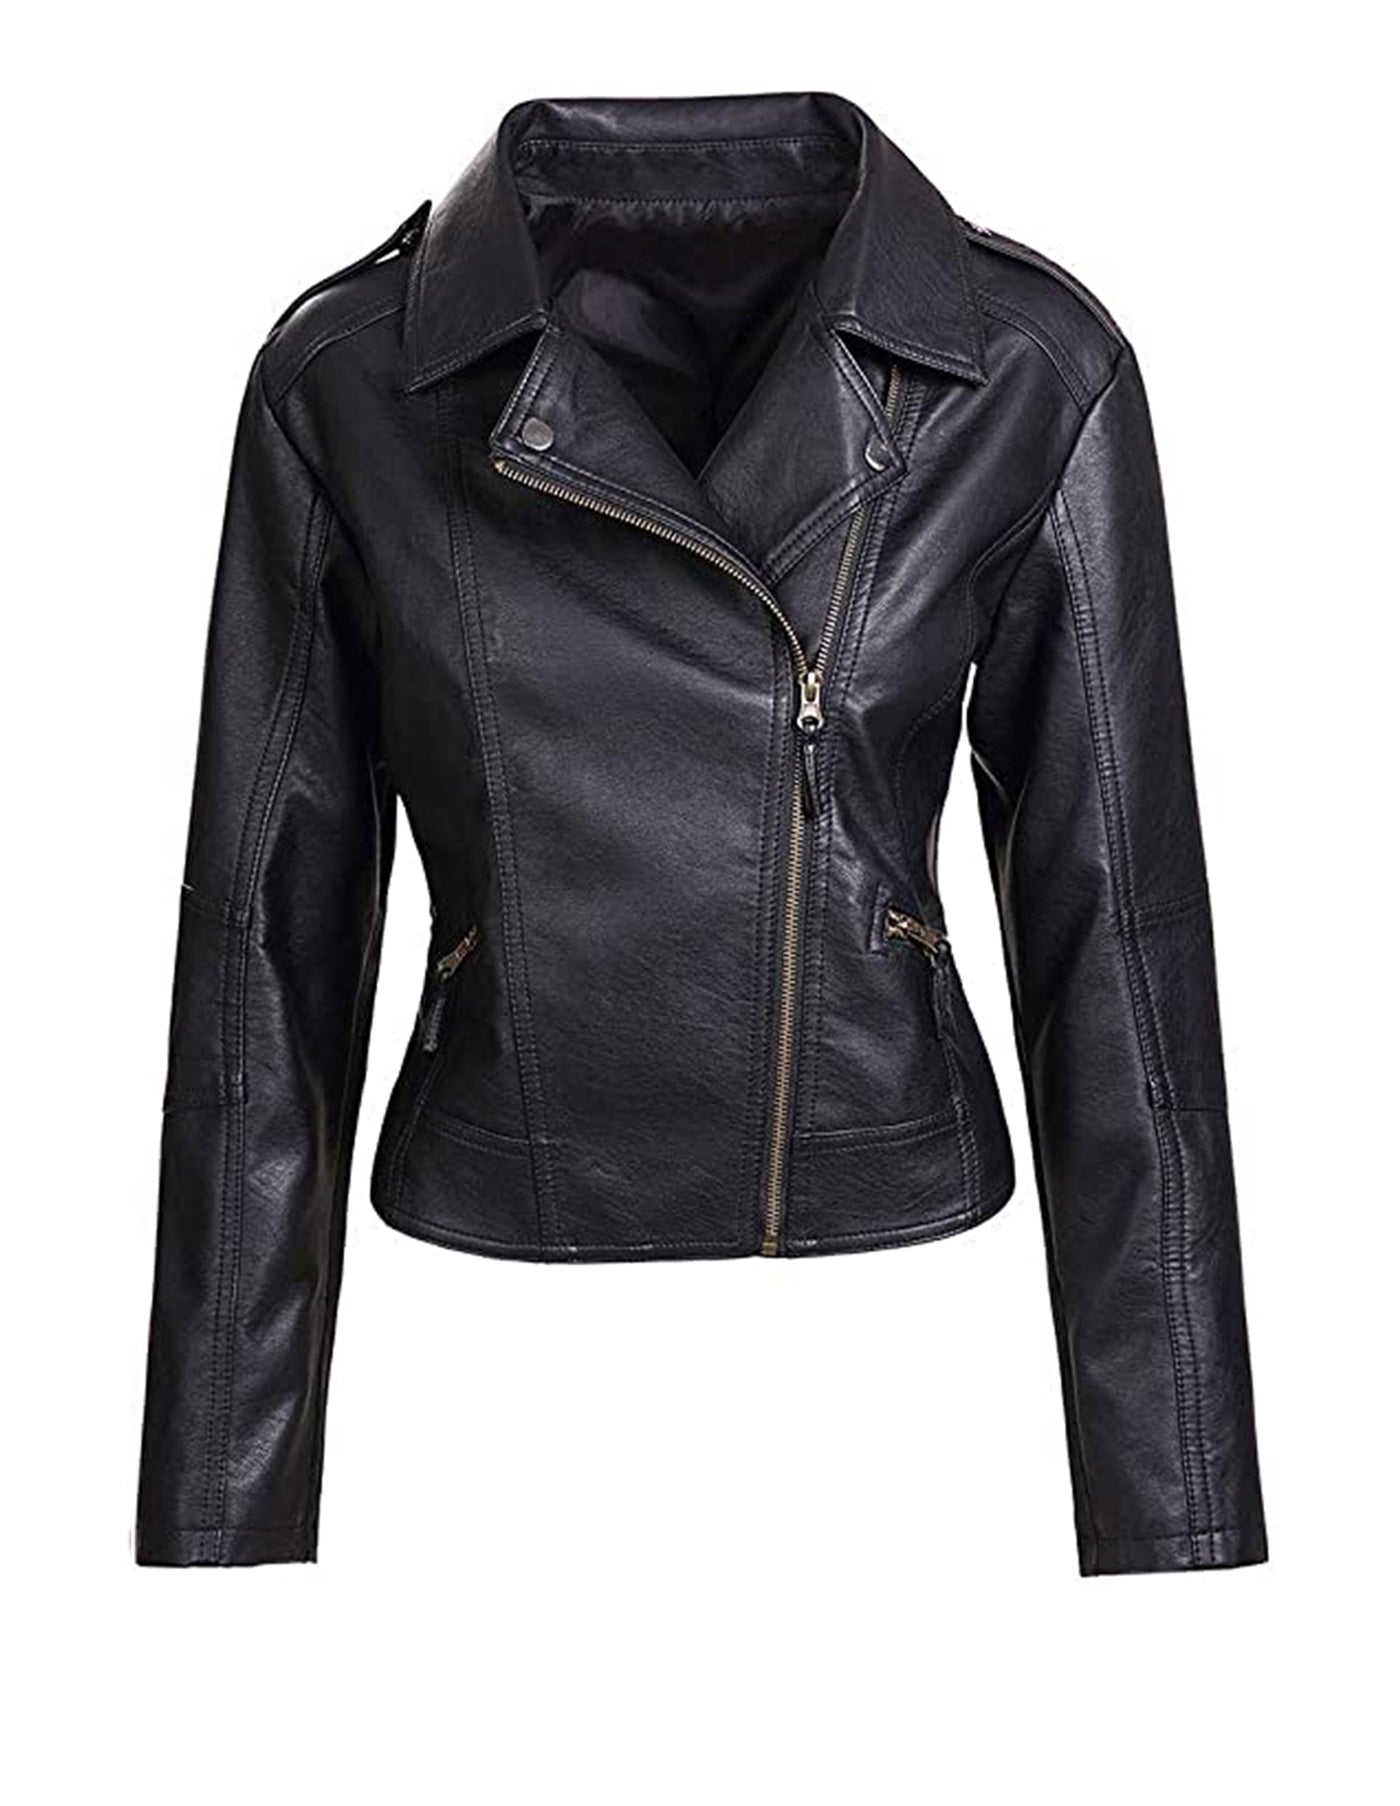 Women's Leather Jackets - Ultimate Leather Jackets